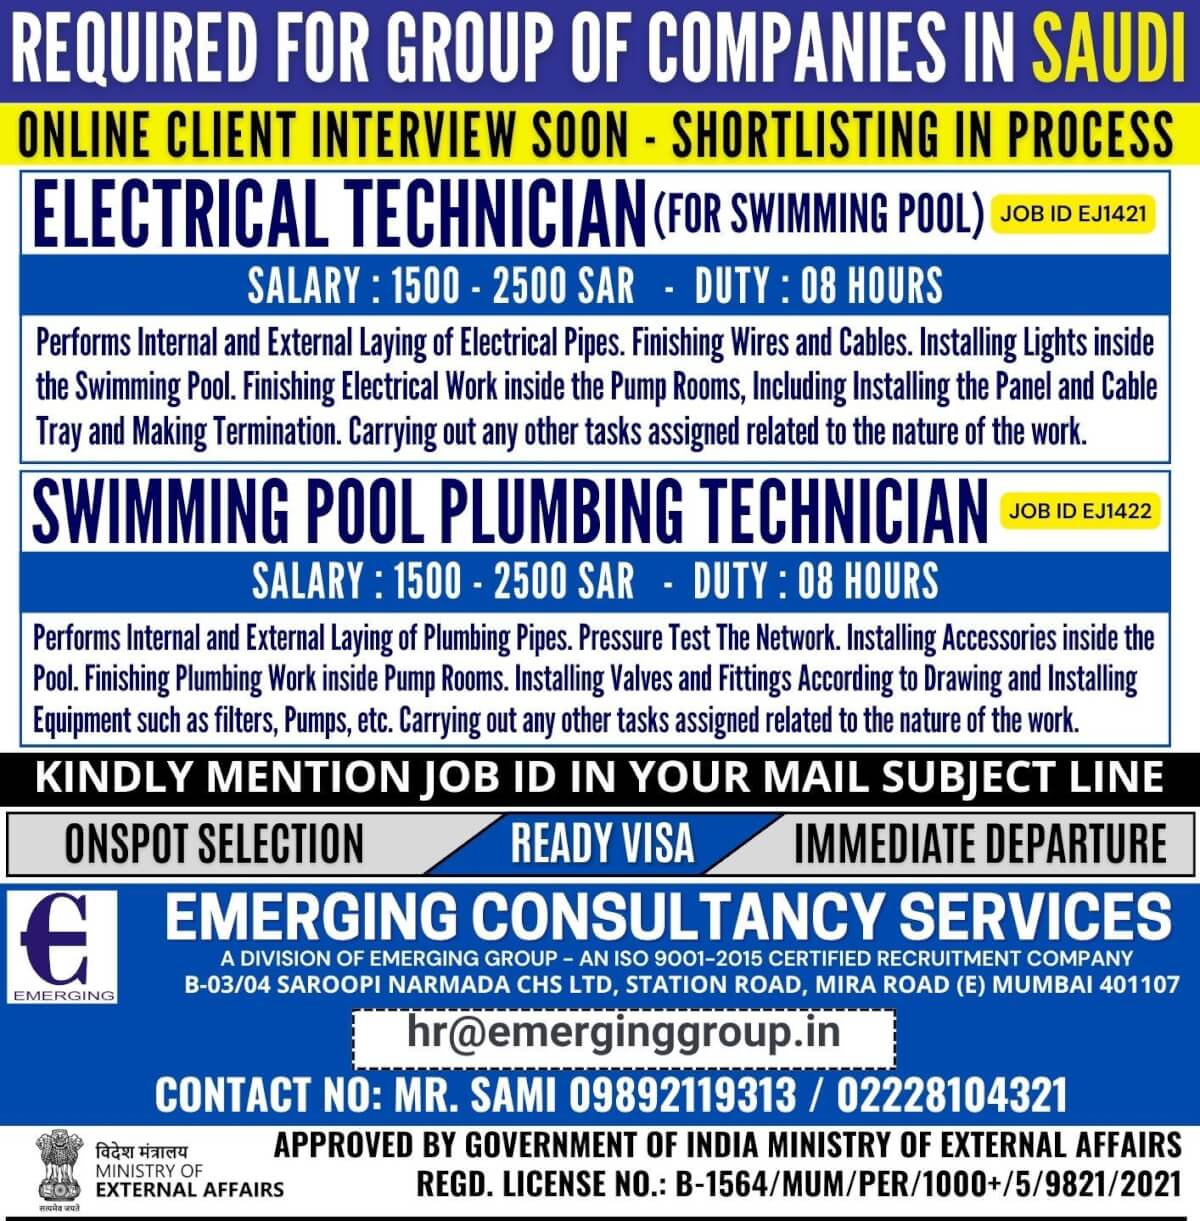 URGENTLY REQUIRED FOR GROUP OF COMPANIES IN SAUDI ARABIA -